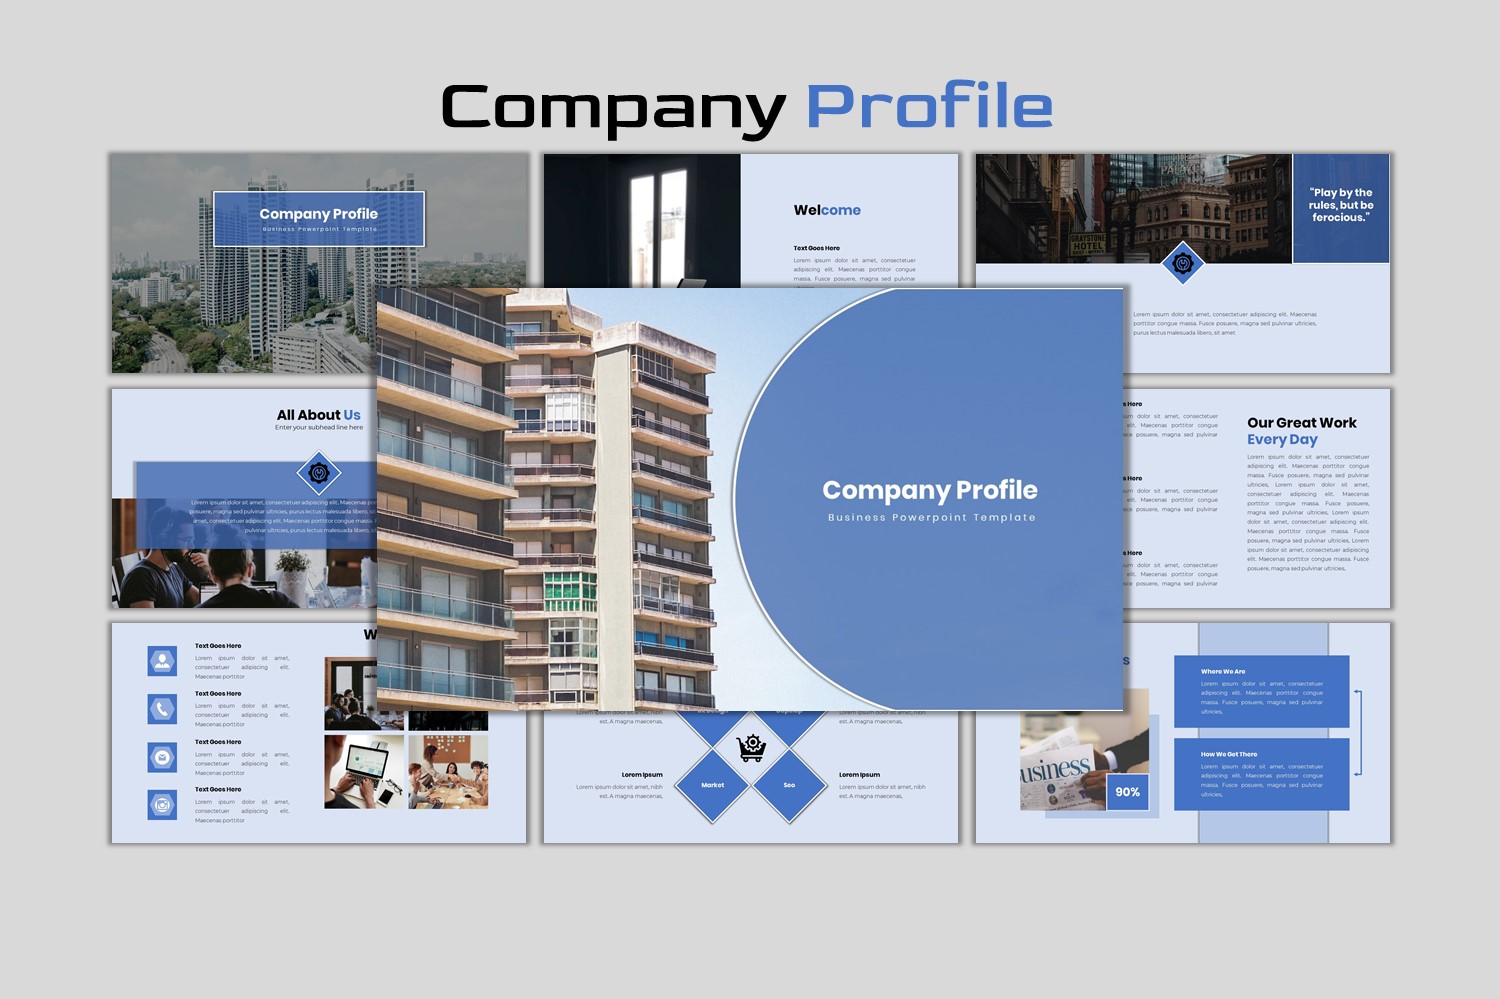 Company Profile 1 - Modern Business PowerPoint template